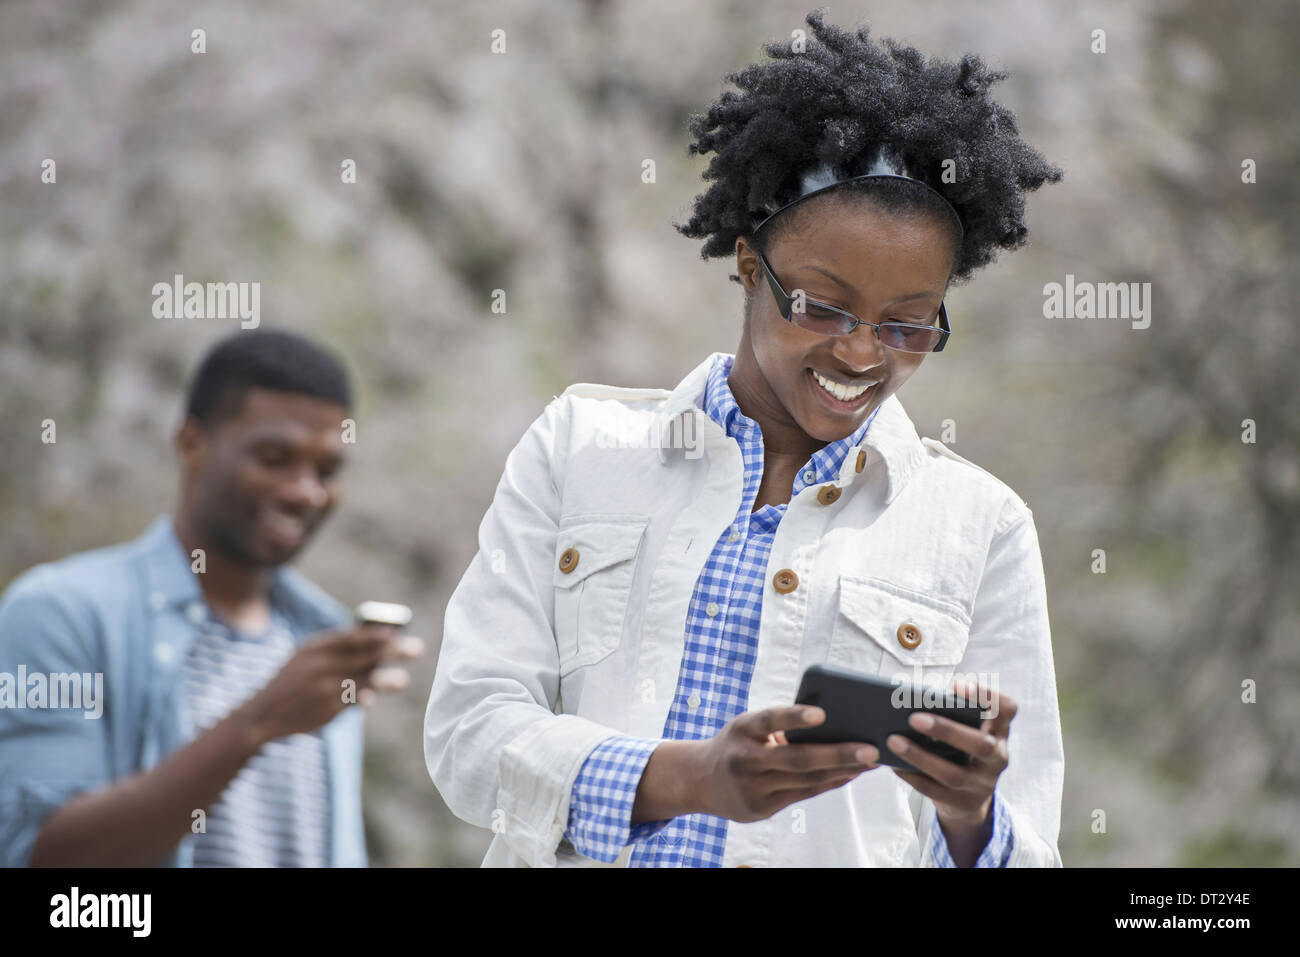 Outdoors city in spring An urban lifestyle A man and woman both checking their phones In the park under the cherry blossom Stock Photo